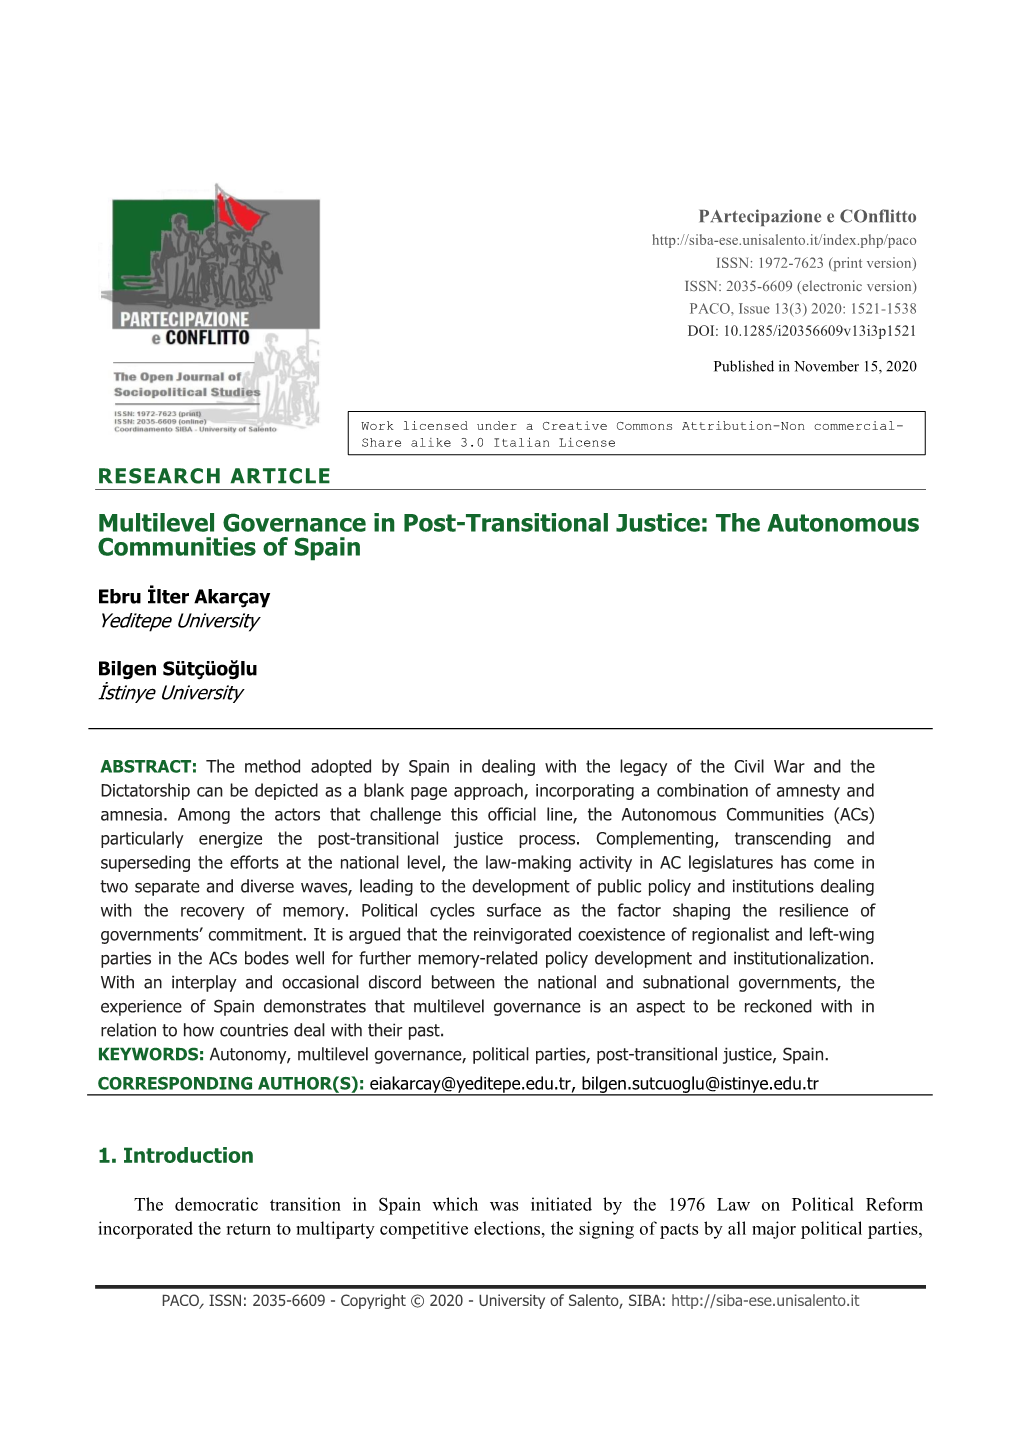 Multilevel Governance in Post-Transitional Justice: the Autonomous Communities of Spain